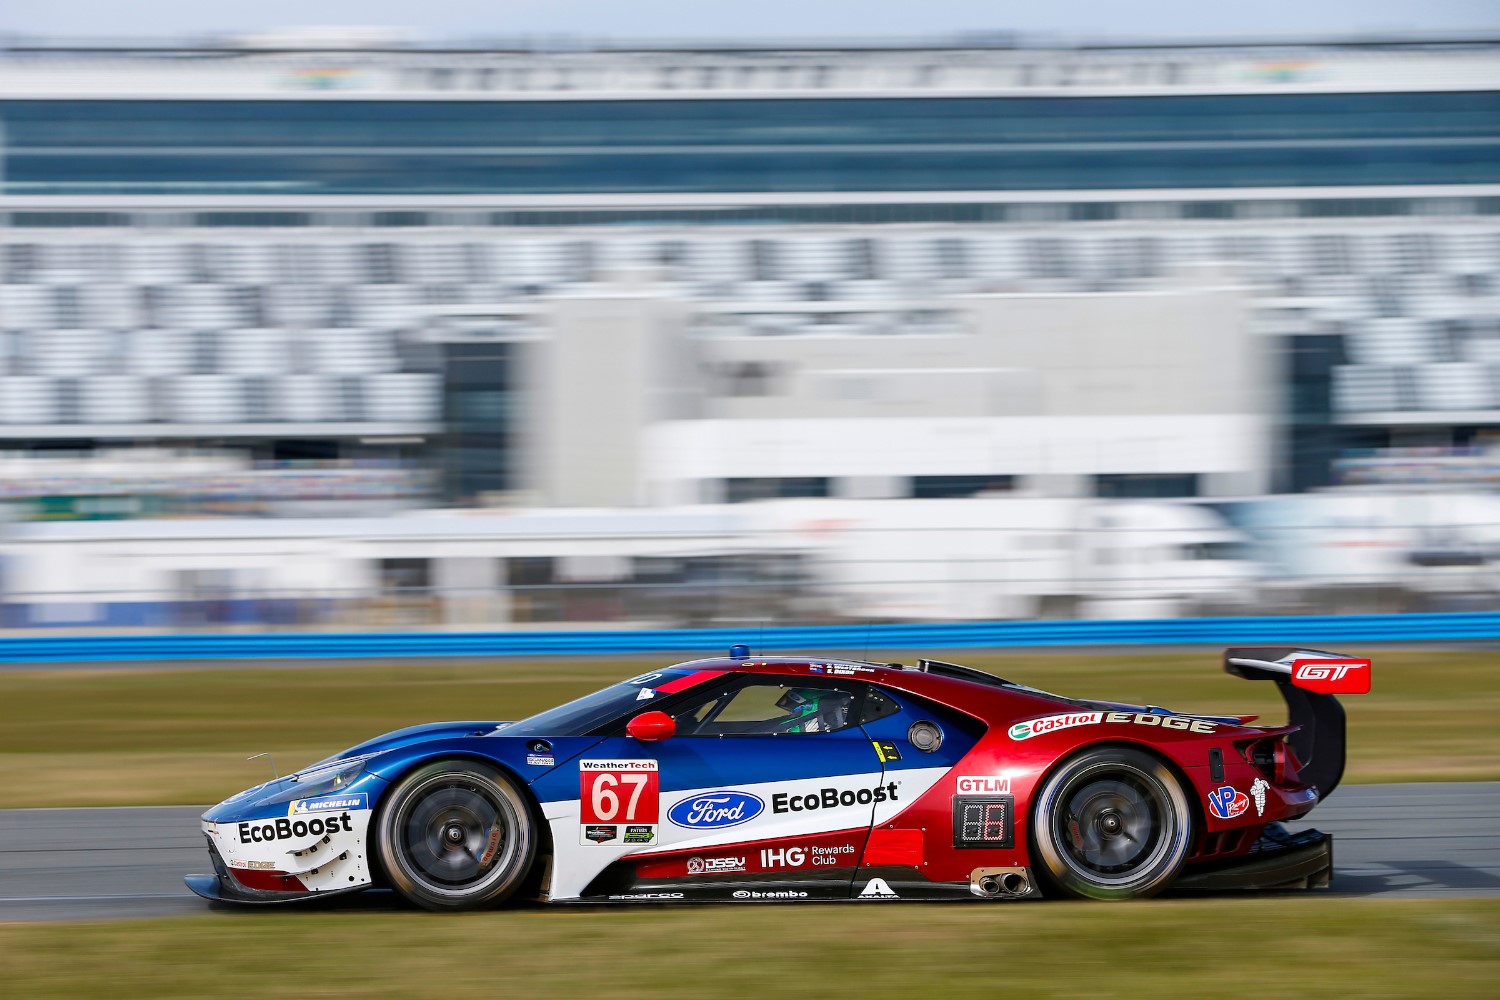 Briscoe in the leading #67 Ford GT